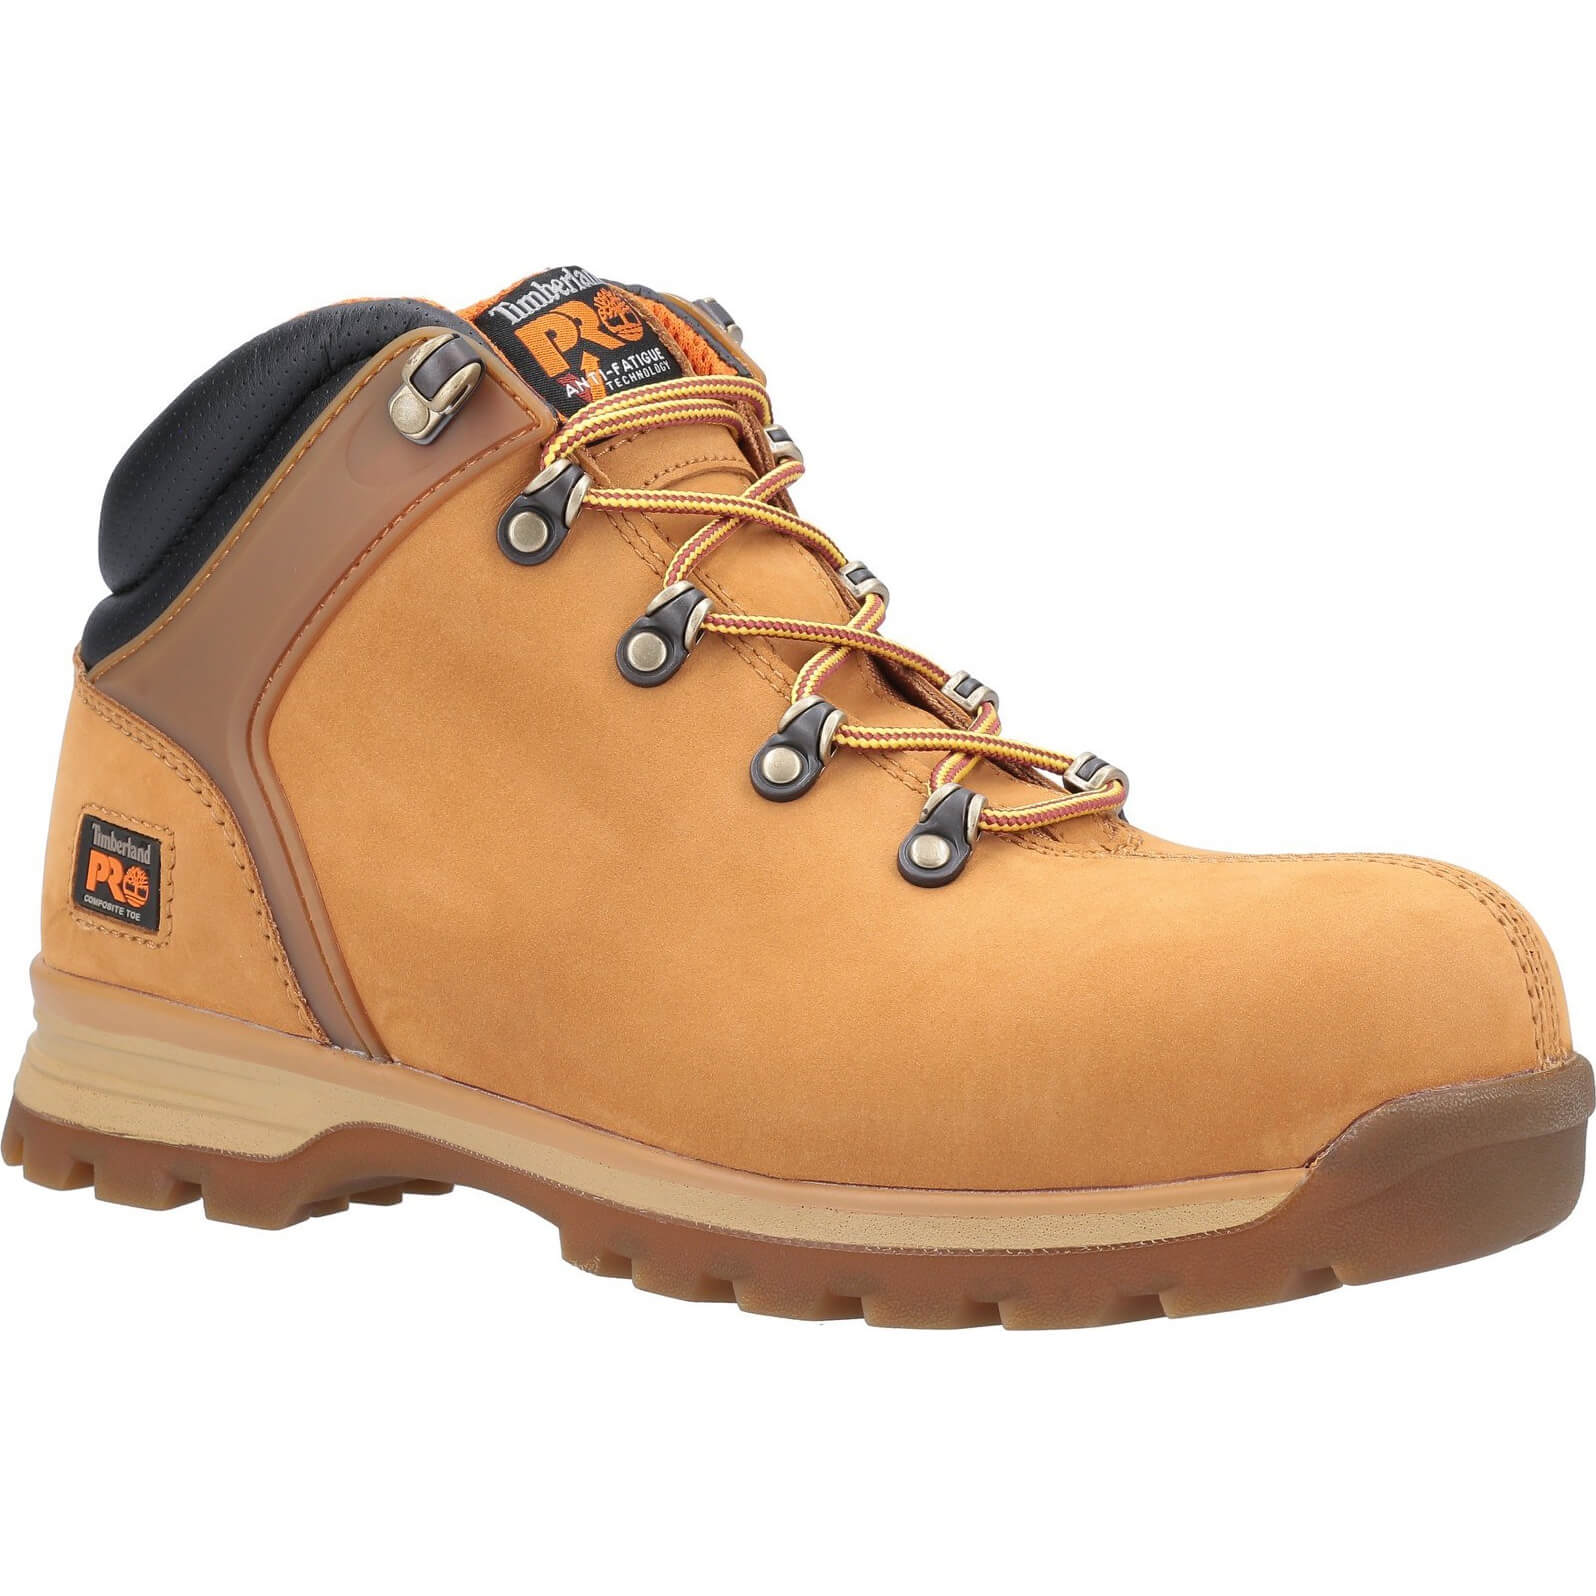 Image of Timberland Pro Splitrock XT Composite Safety Toe Work Boot Wheat Size 8